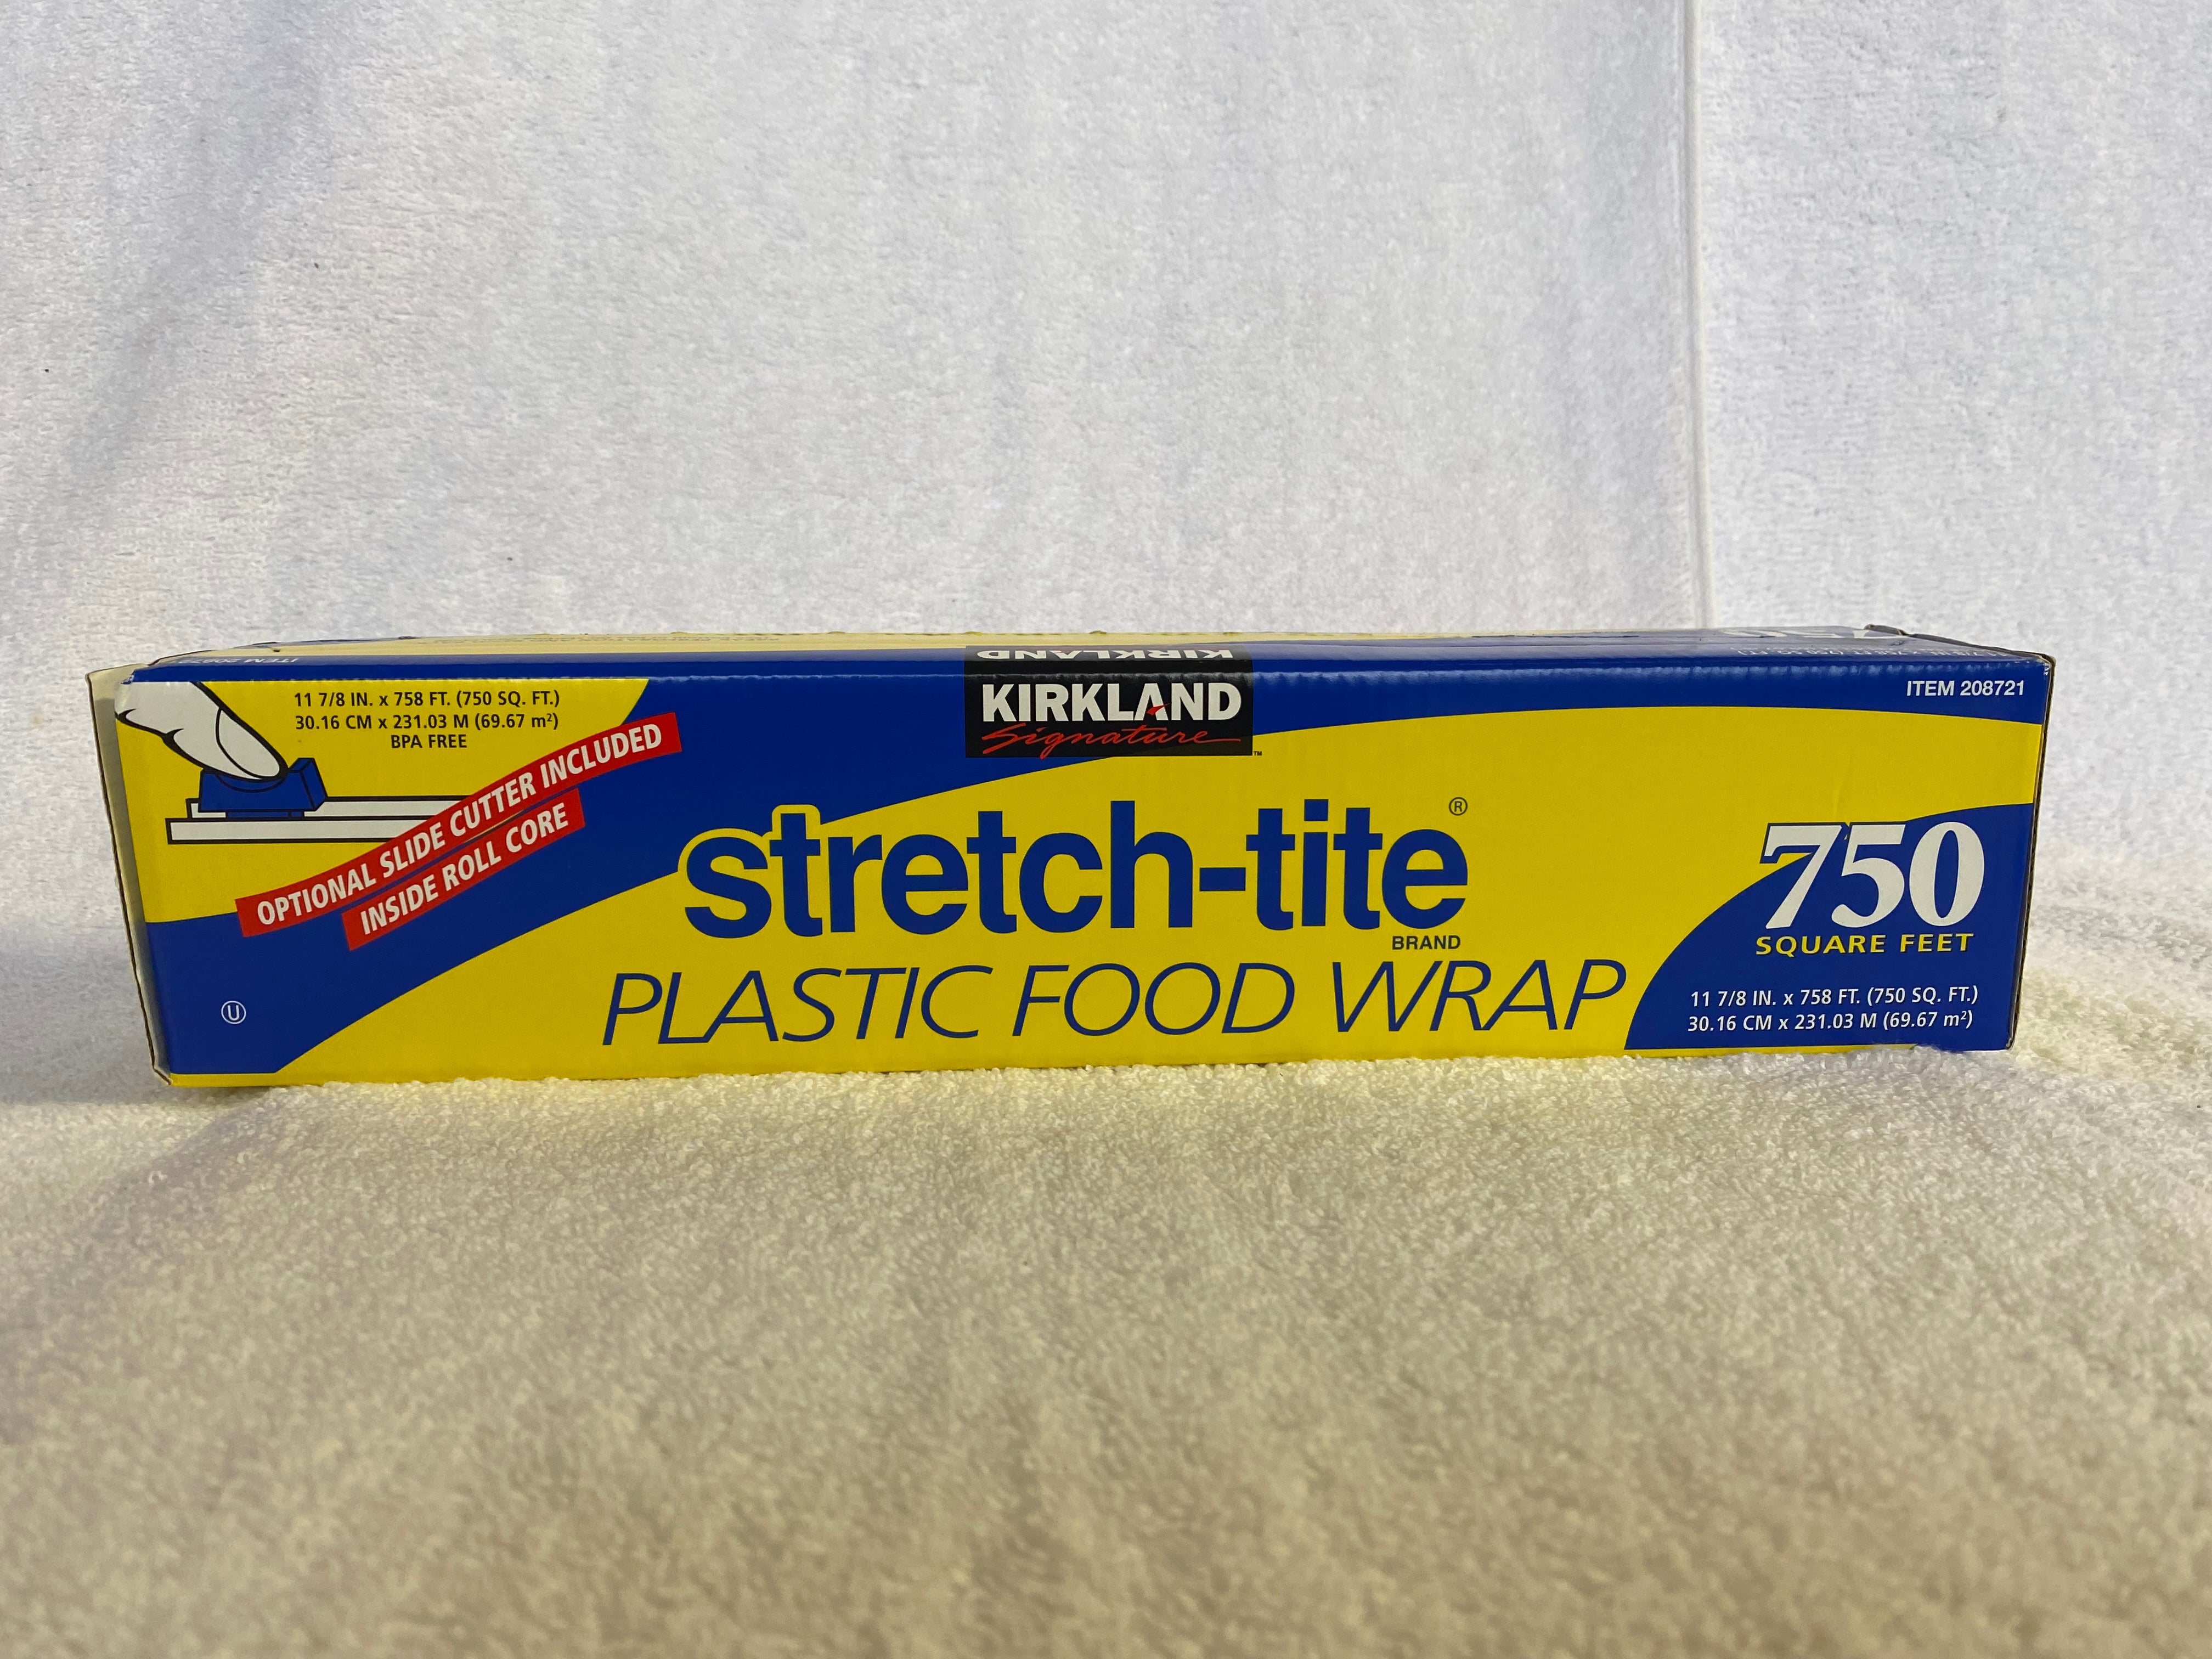 Kirkland Signature Stretch Tite Plastic Food Wrap 11 7/8 Inch X 750 SQ. FT.  Pack 4 750 Sq Ft (Pack of 4)